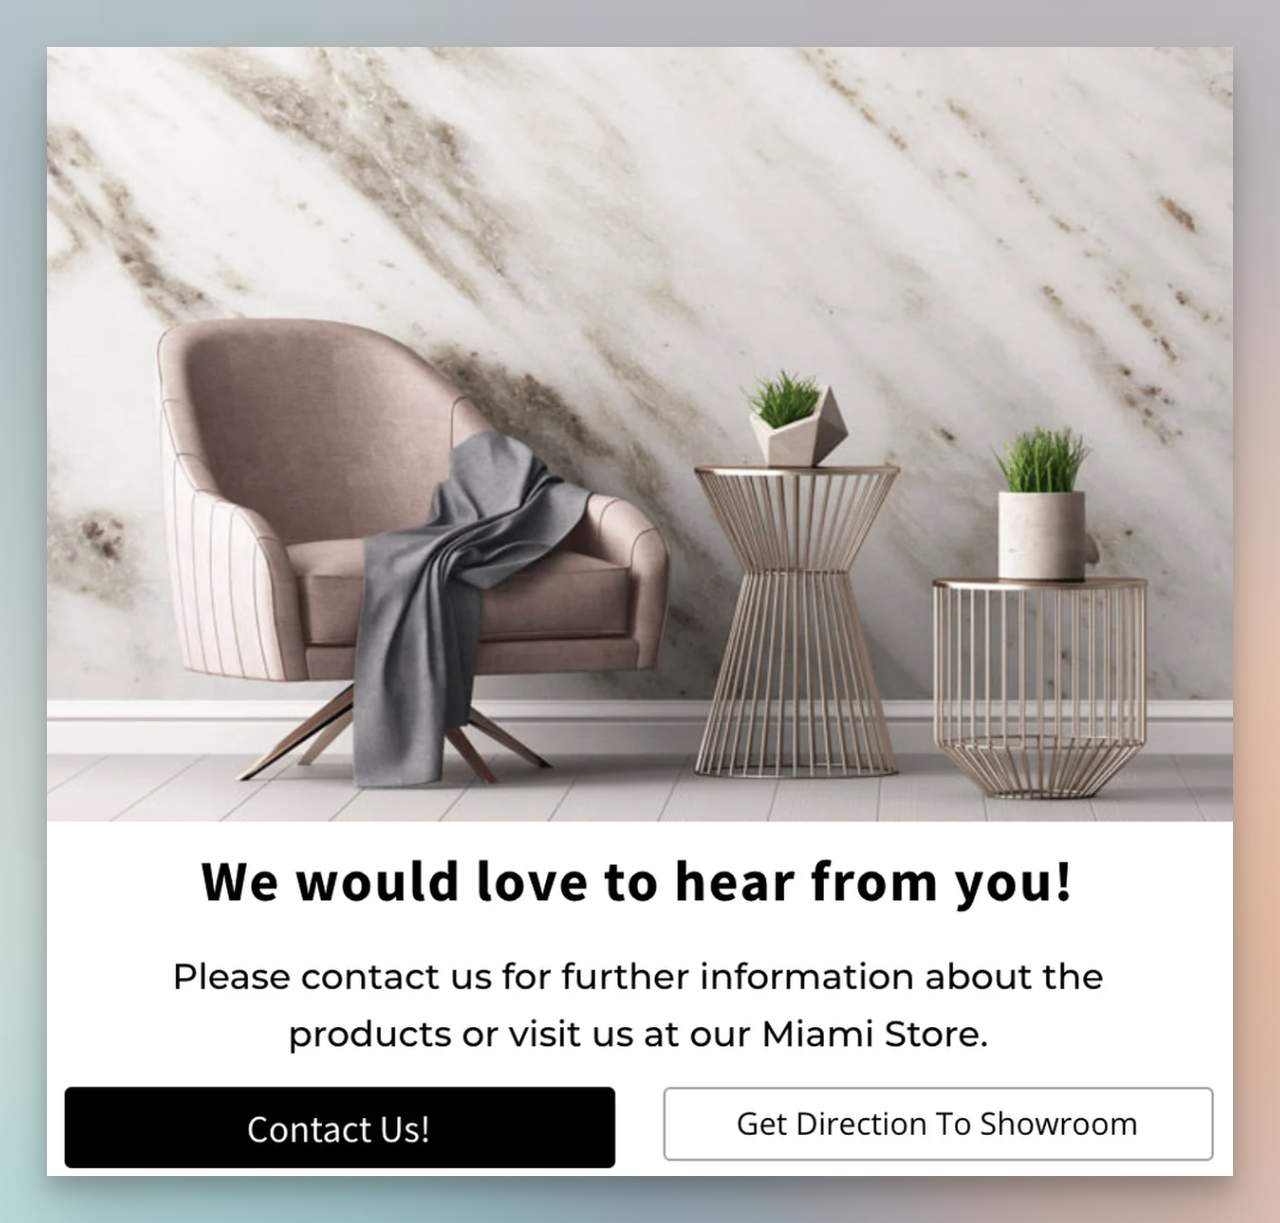 a popup example that has a button for contact page and another button to get direction to showroom